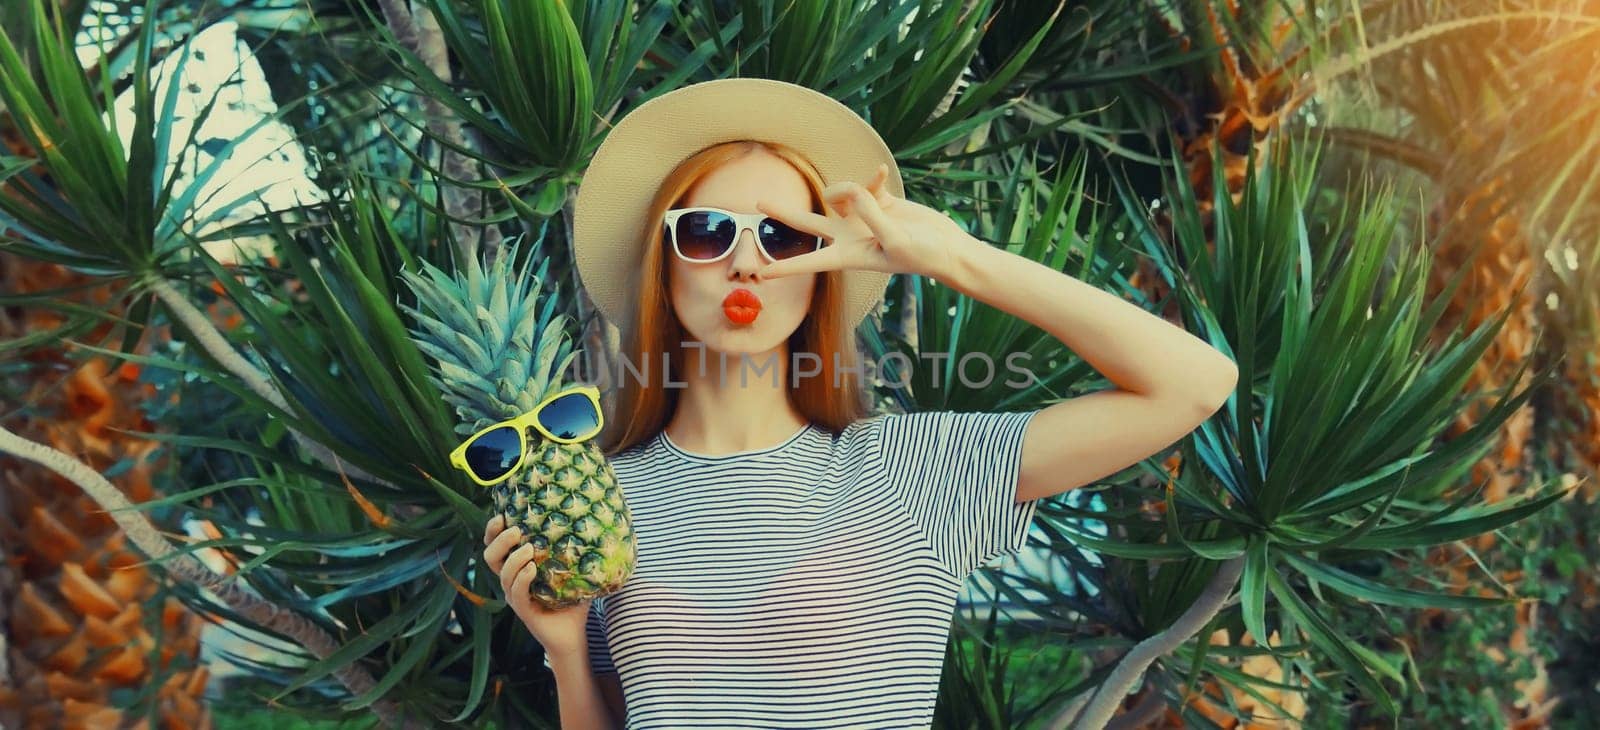 Summer portrait of beautiful young woman with pineapple fruits posing blowing lips sends kiss wearing sunglasses, straw hat on palm tree background